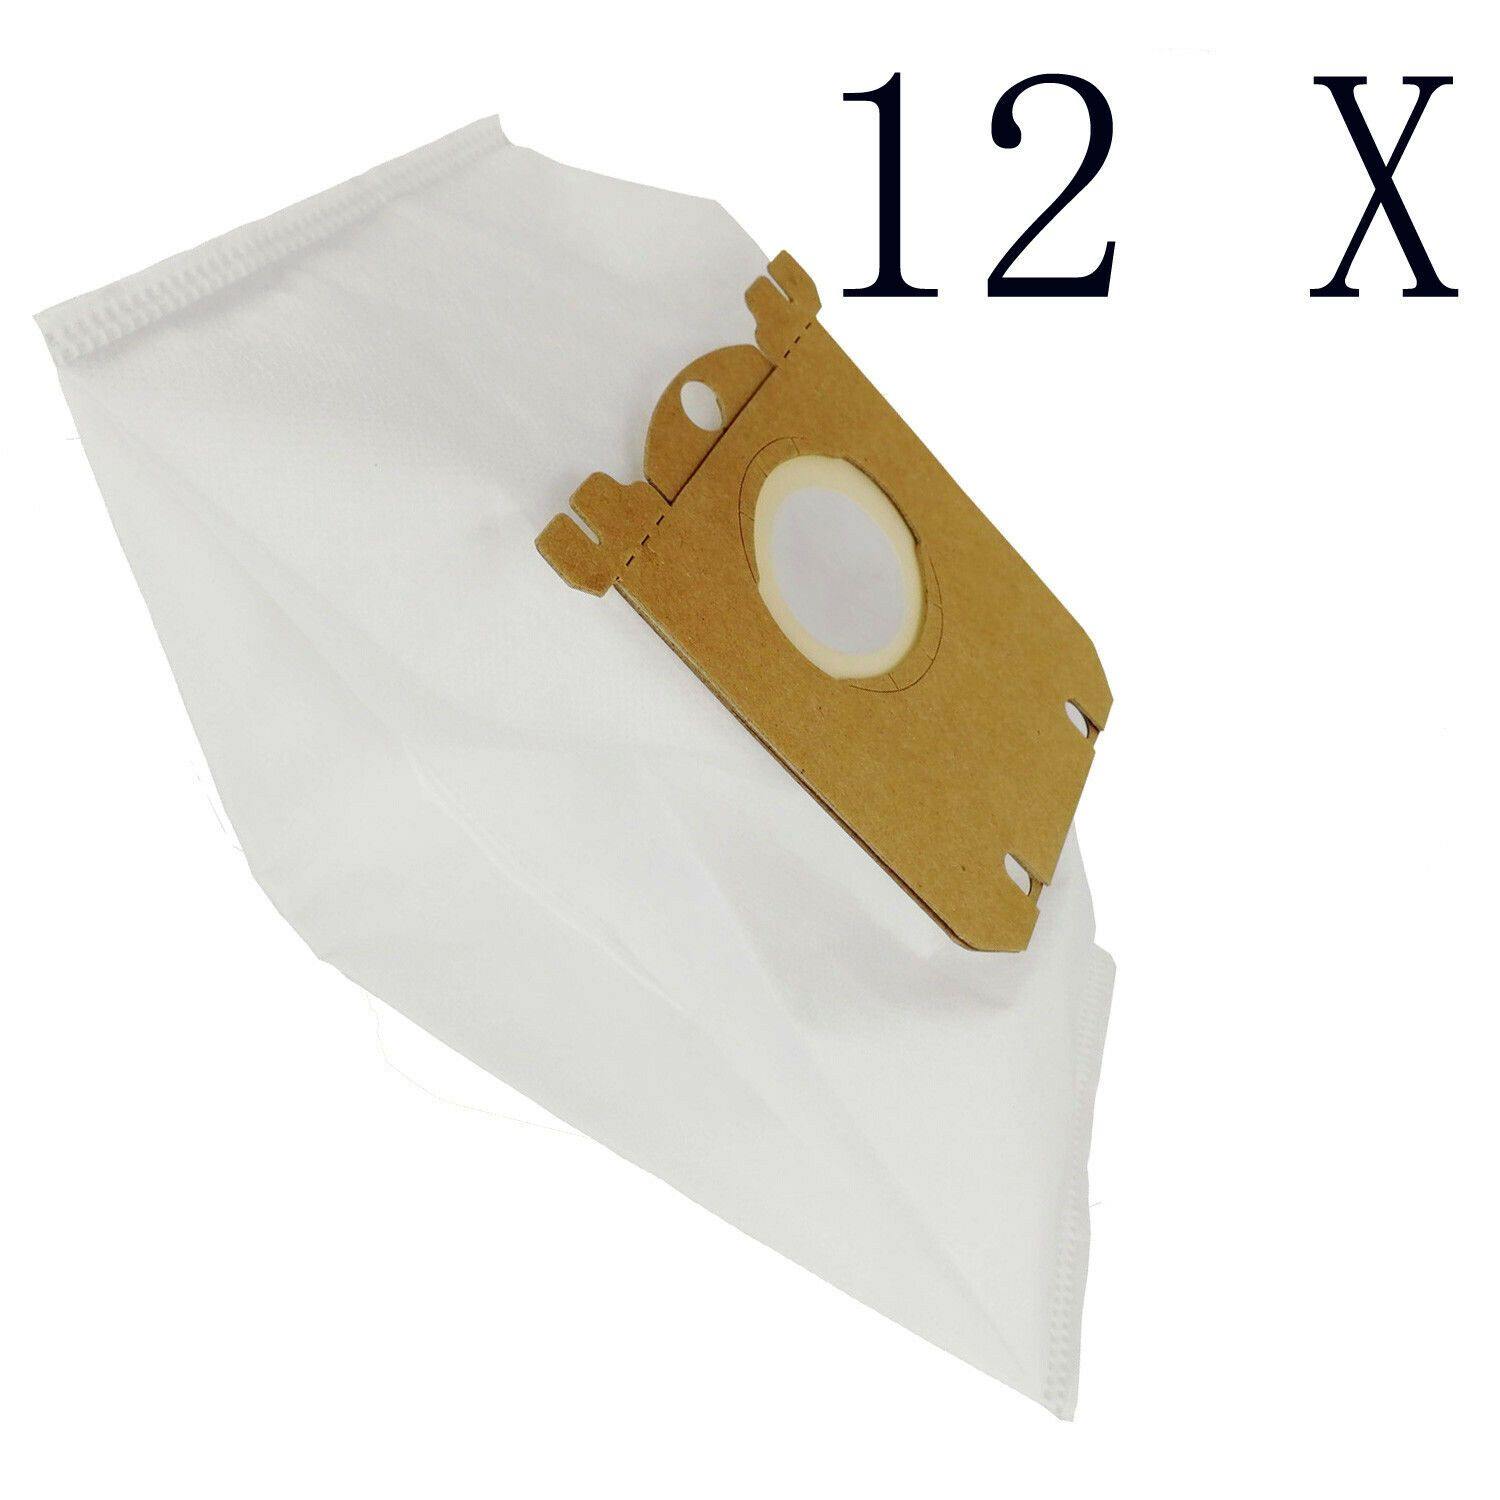 12 X Vacuum Cleaner Bags For Electrolux Ultra One Z8830PT TURBO ZUO9923PT DELUXE Sparesbarn